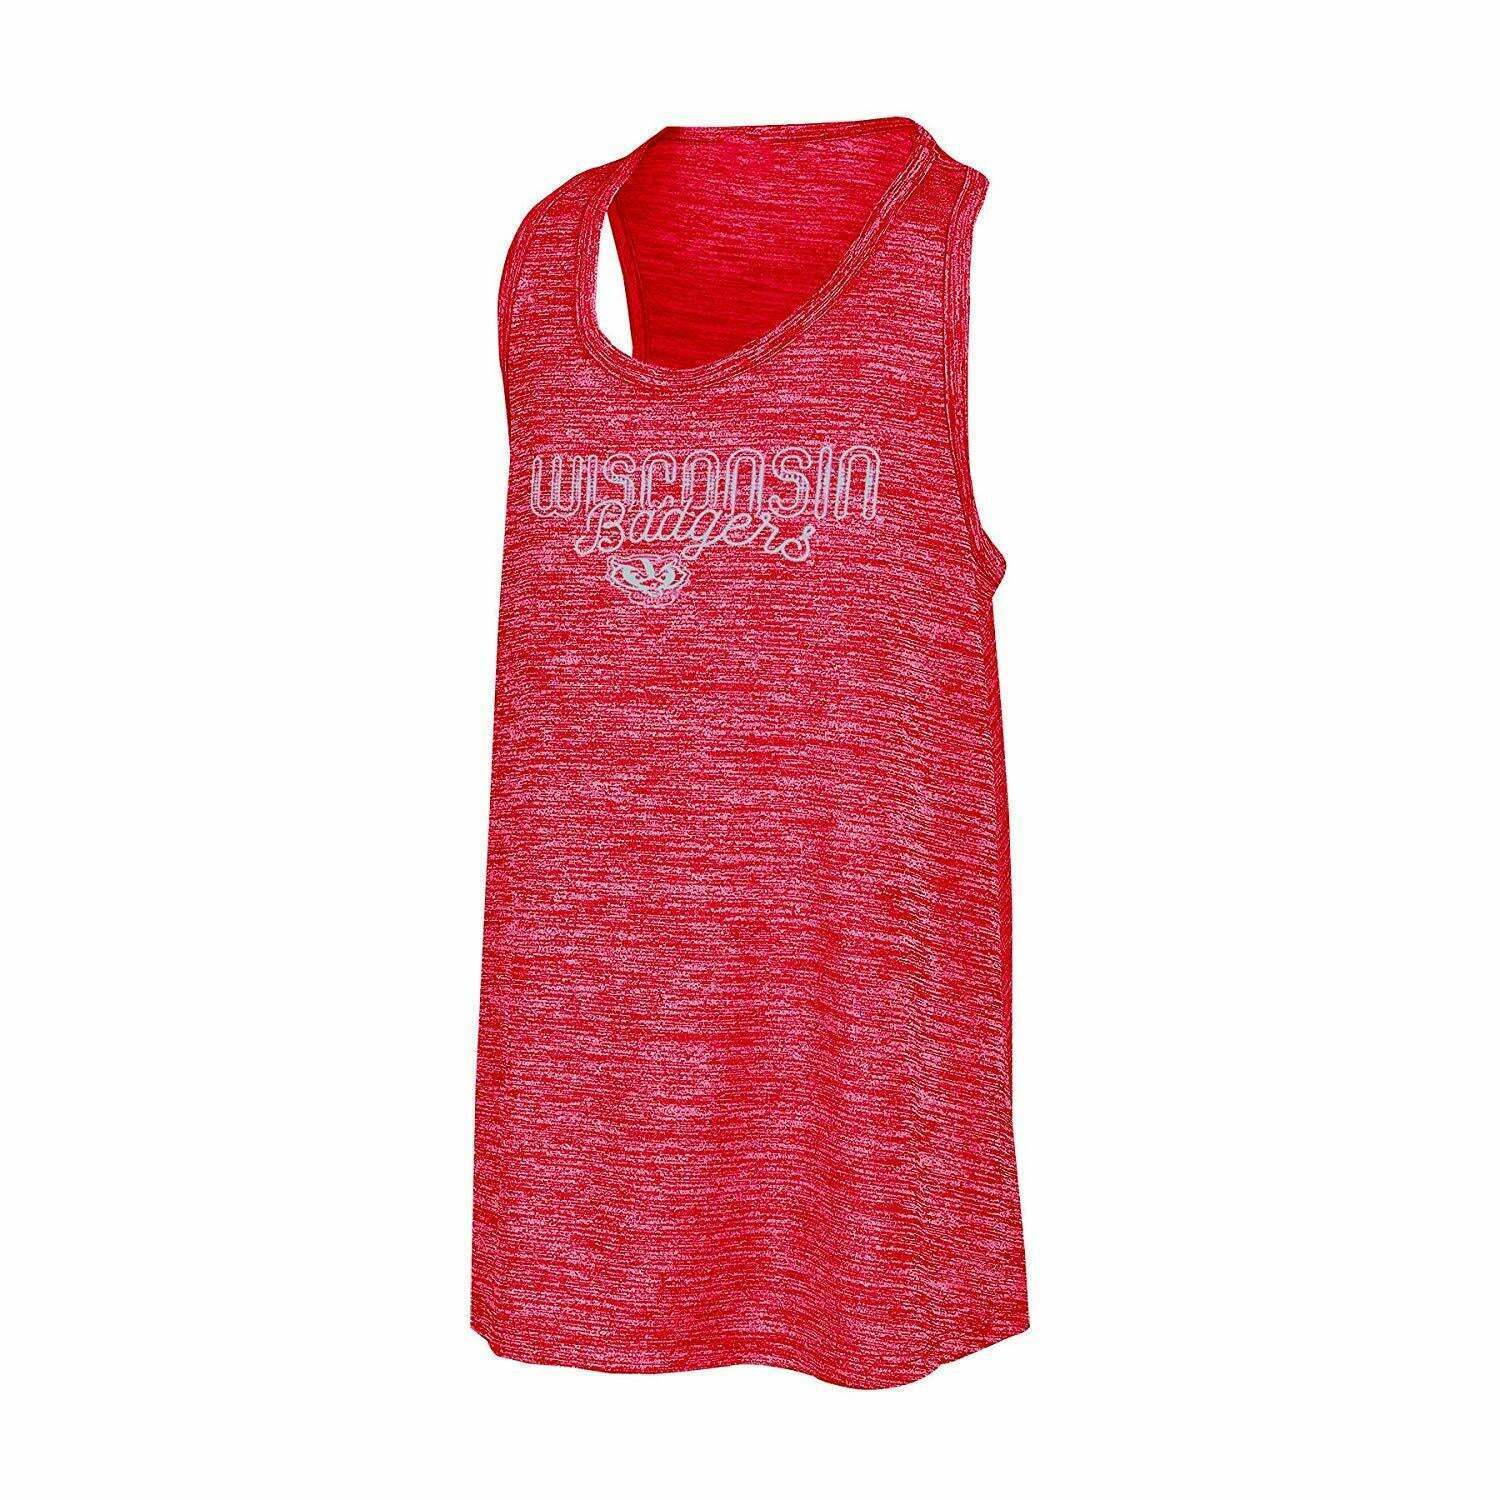 Primary image for Champion NCAA Wisconsin Badgers Girls Tank Top Racer Back, Size Small